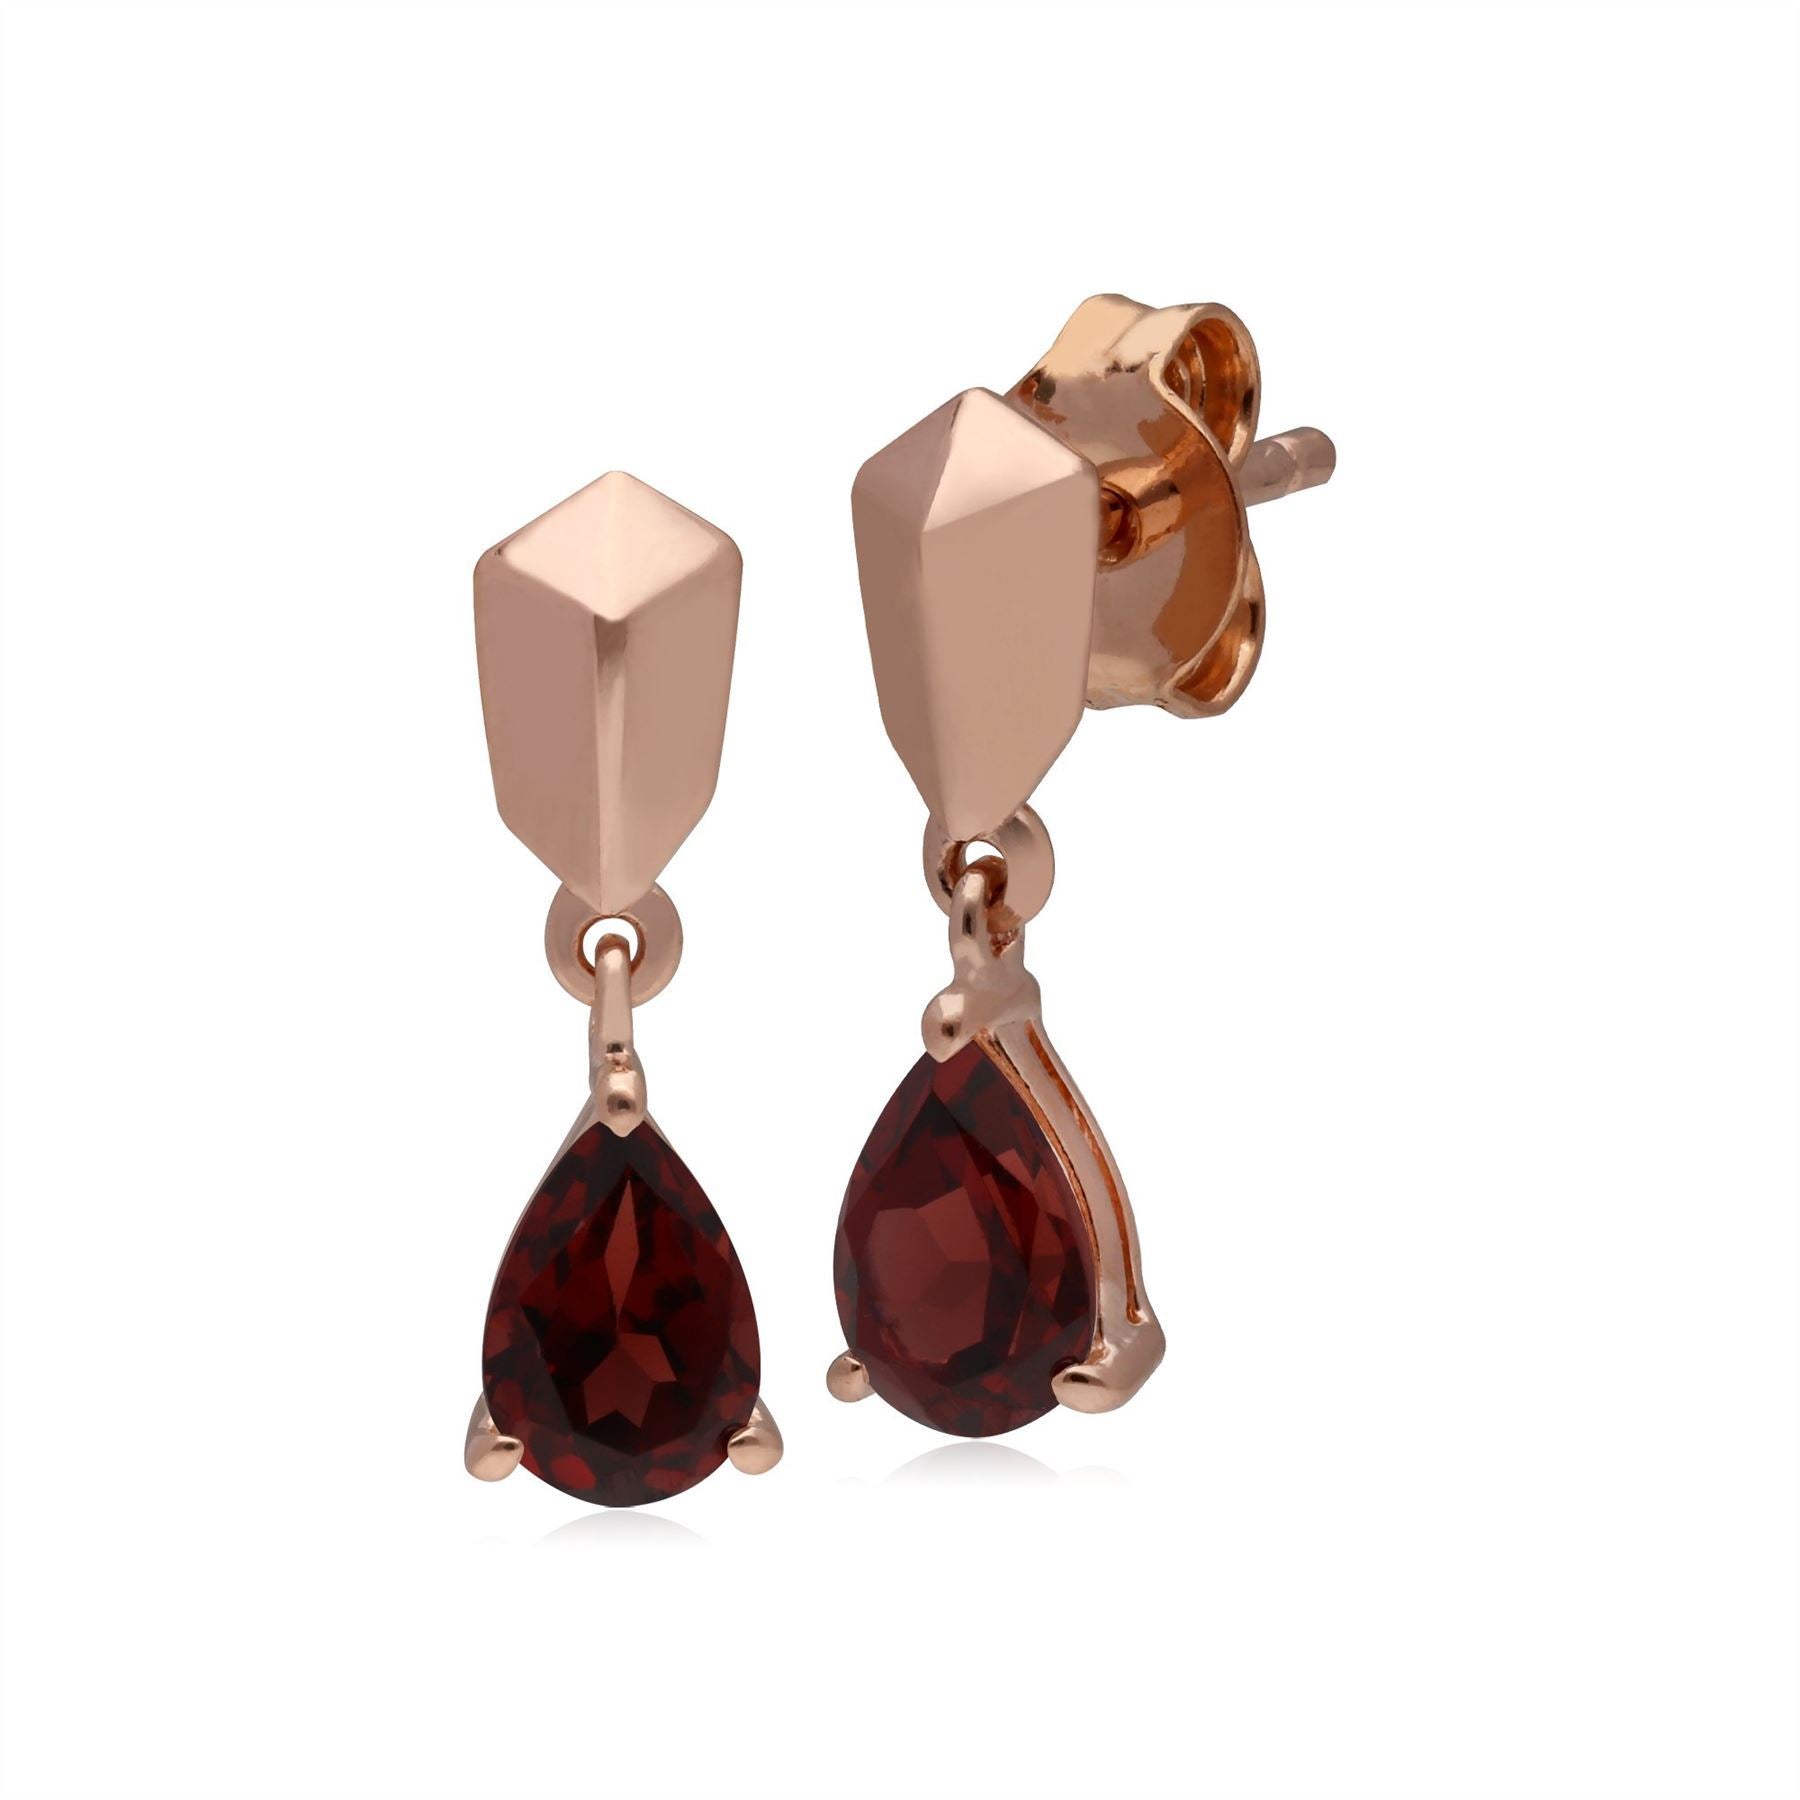 =Micro Statement Garnet Earrings in Rose Gold Plated 925 Sterling